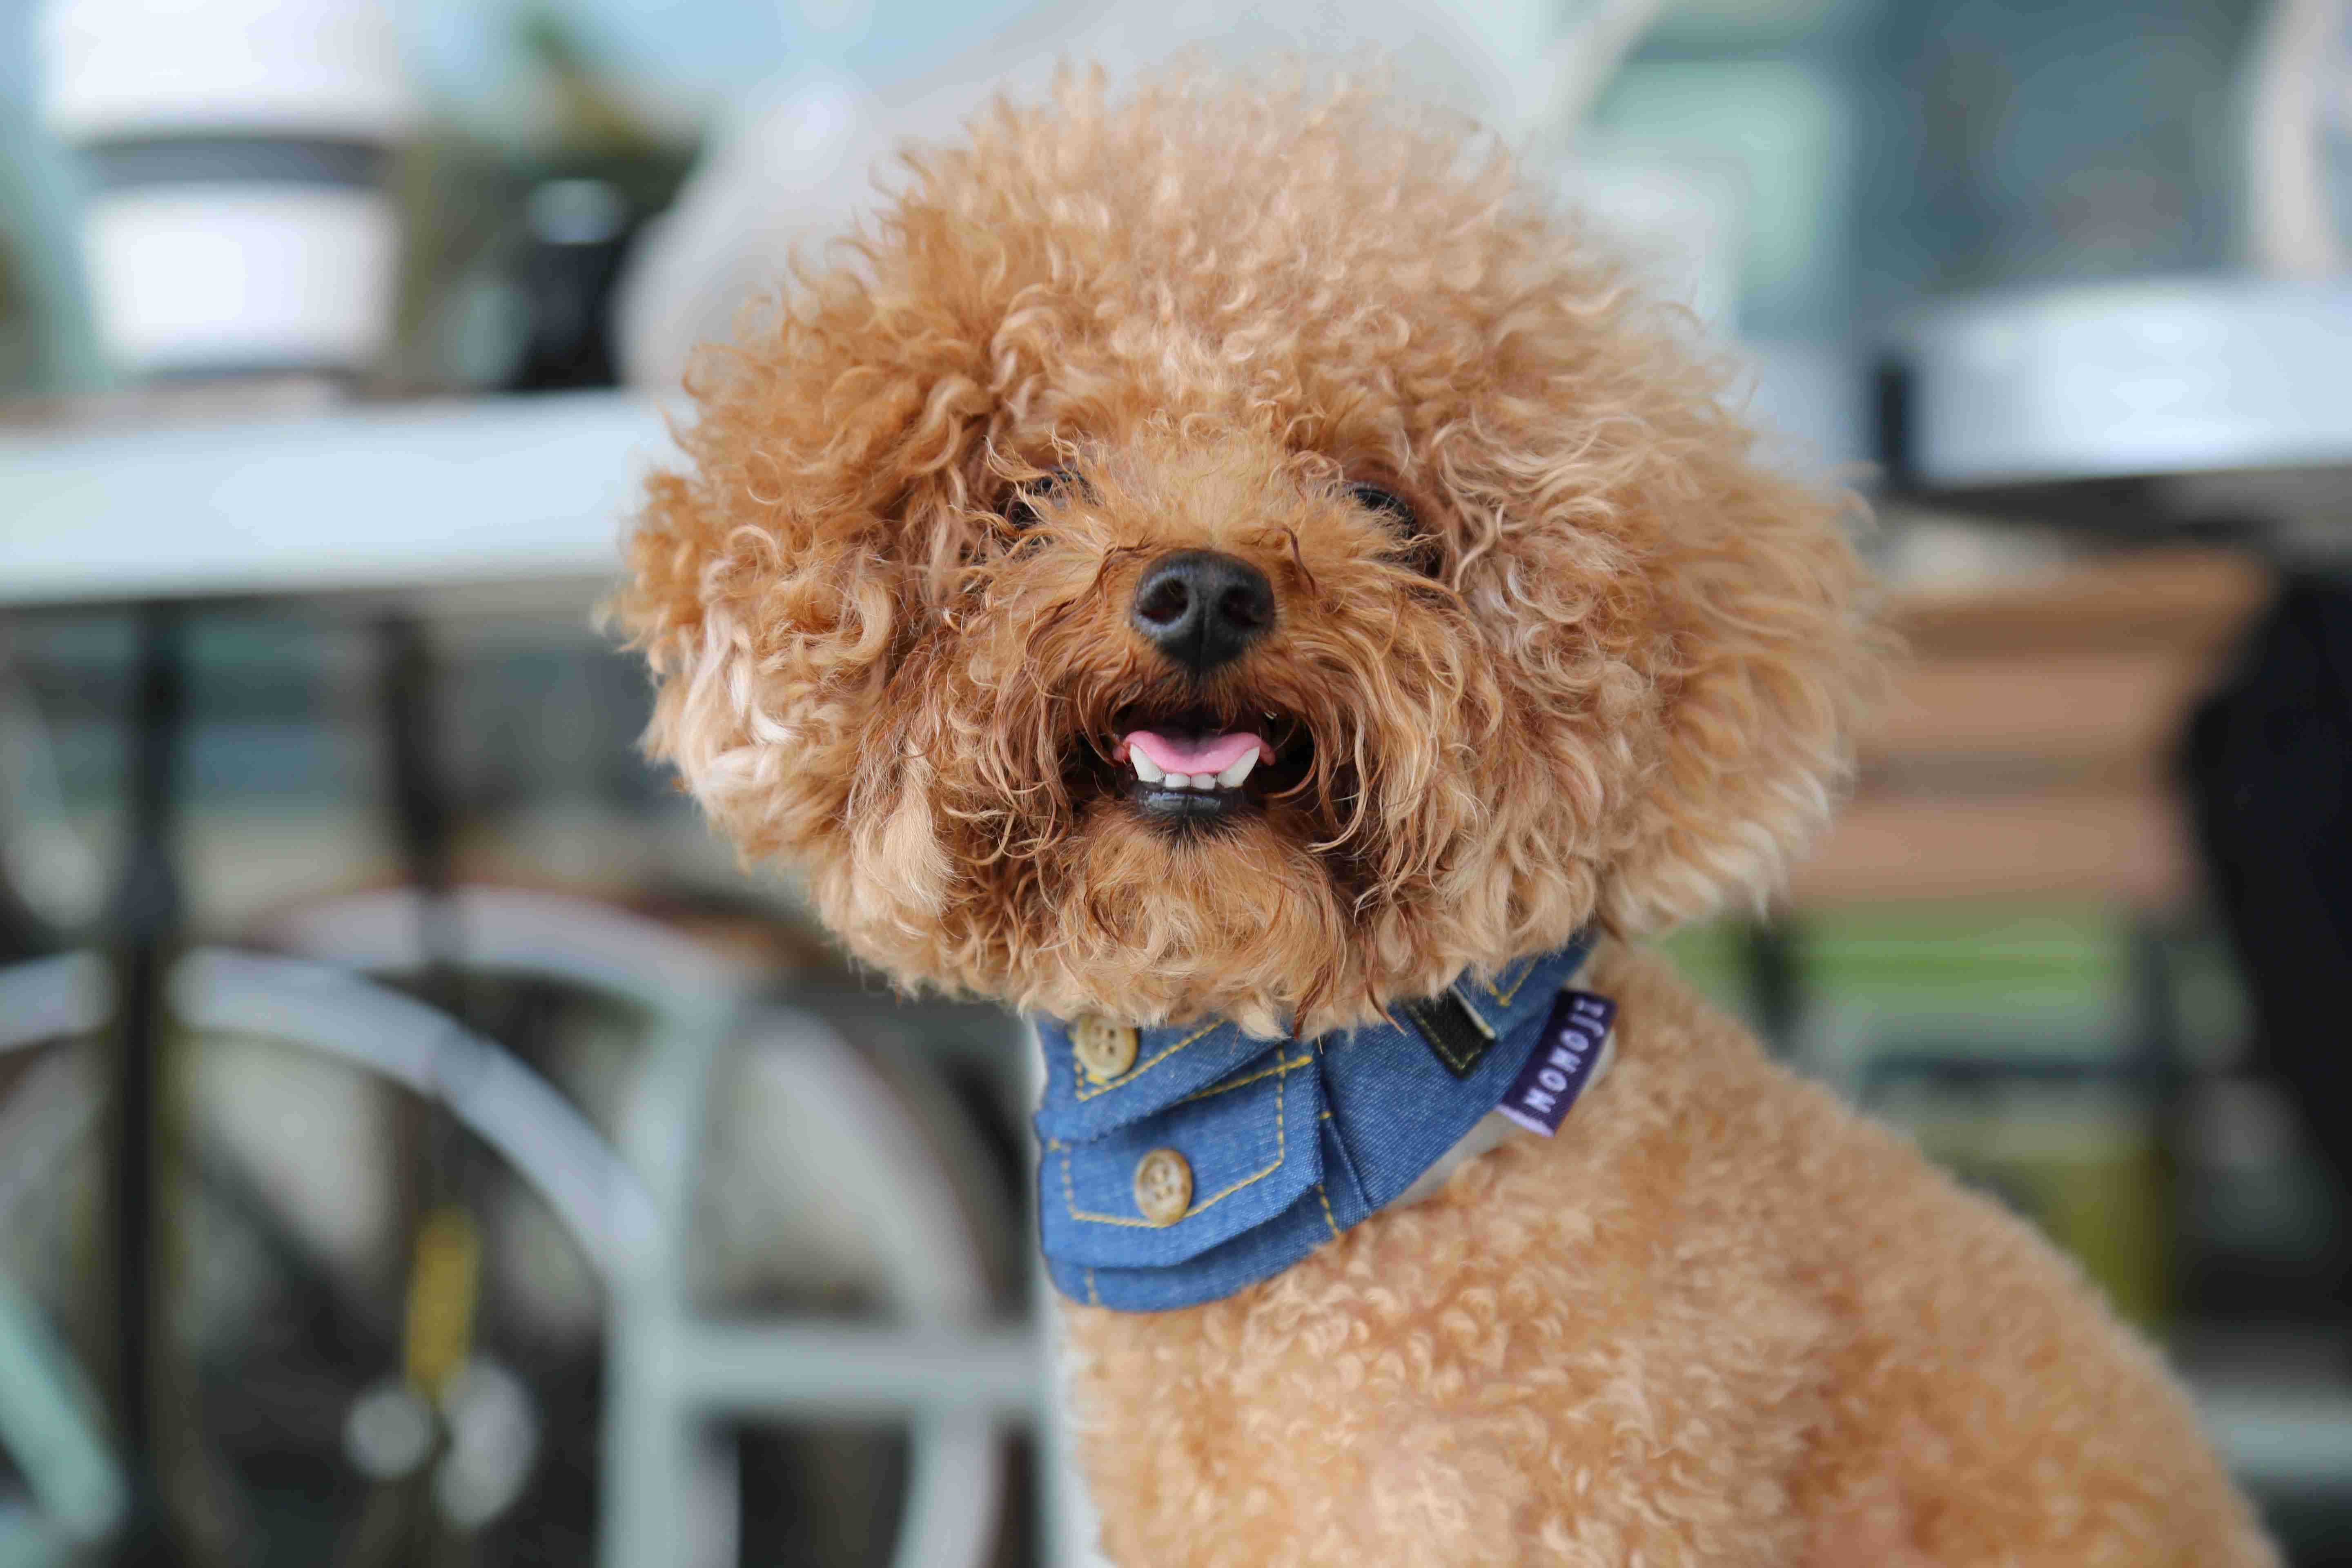 Are there any specific grooming practices that can help prevent health issues in Poodles?